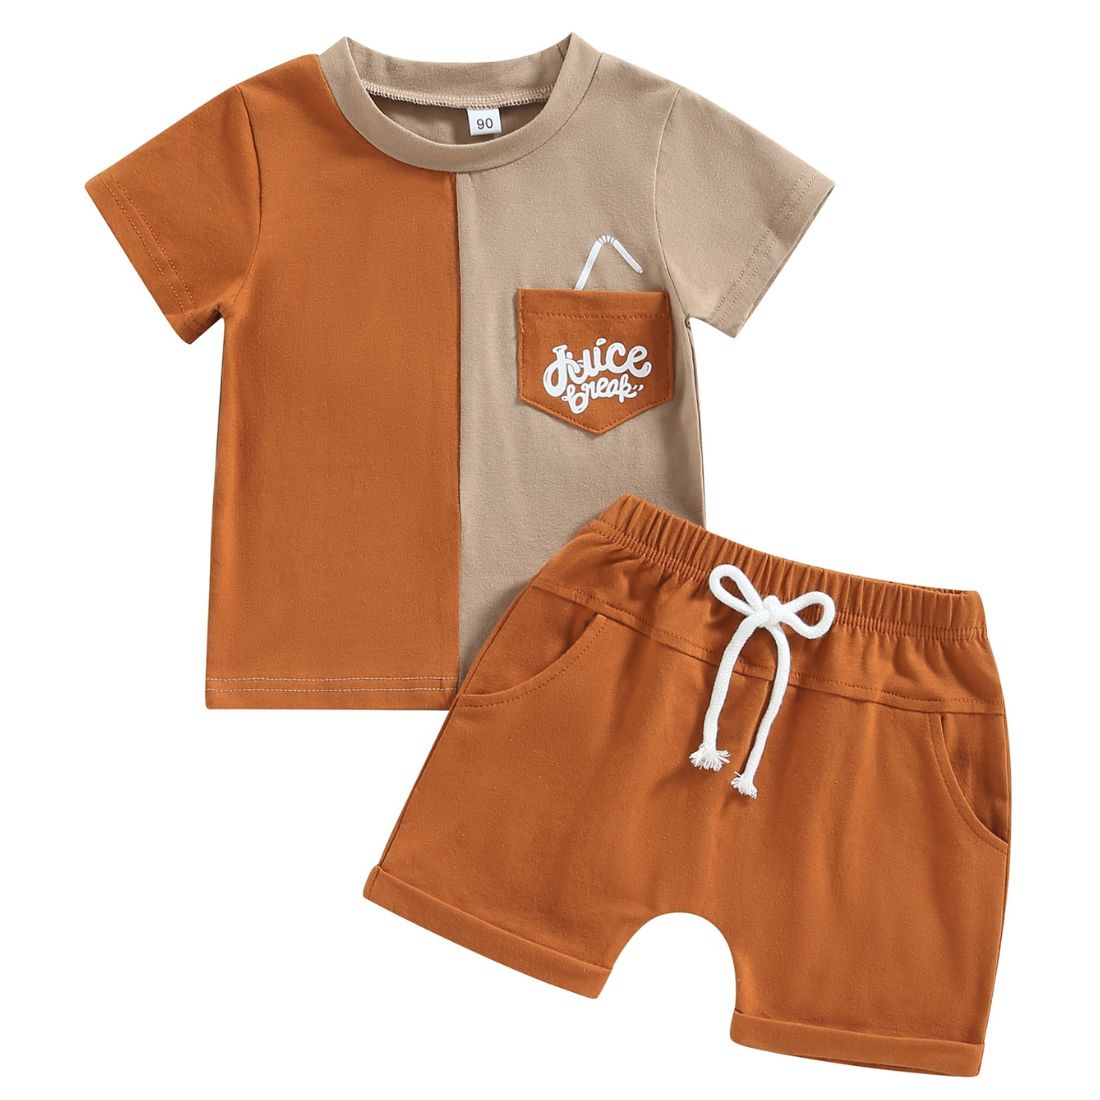 Little Boy Juice Break Tee 2-Piece Clothing Set - My Trendy Youngsters | Buy Trendy and Afforable Baby and Toddler Clothing Sets @ My Trendy Youngsters - Dress your little man in Style @ My Trendy Youngsters 